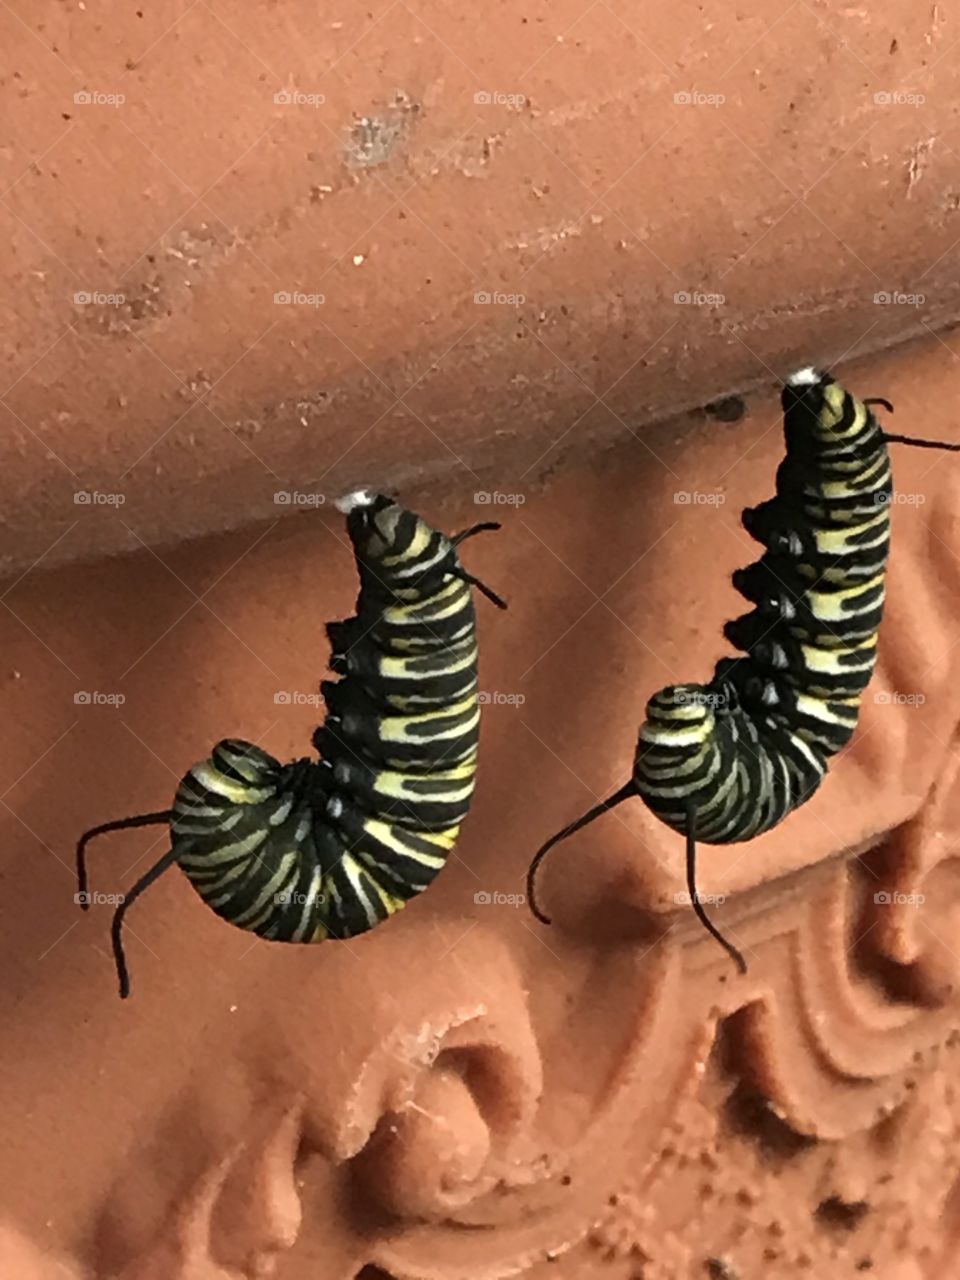 Two monarch caterpillars moments ago glued their bottoms onto planter readying for cocooning.